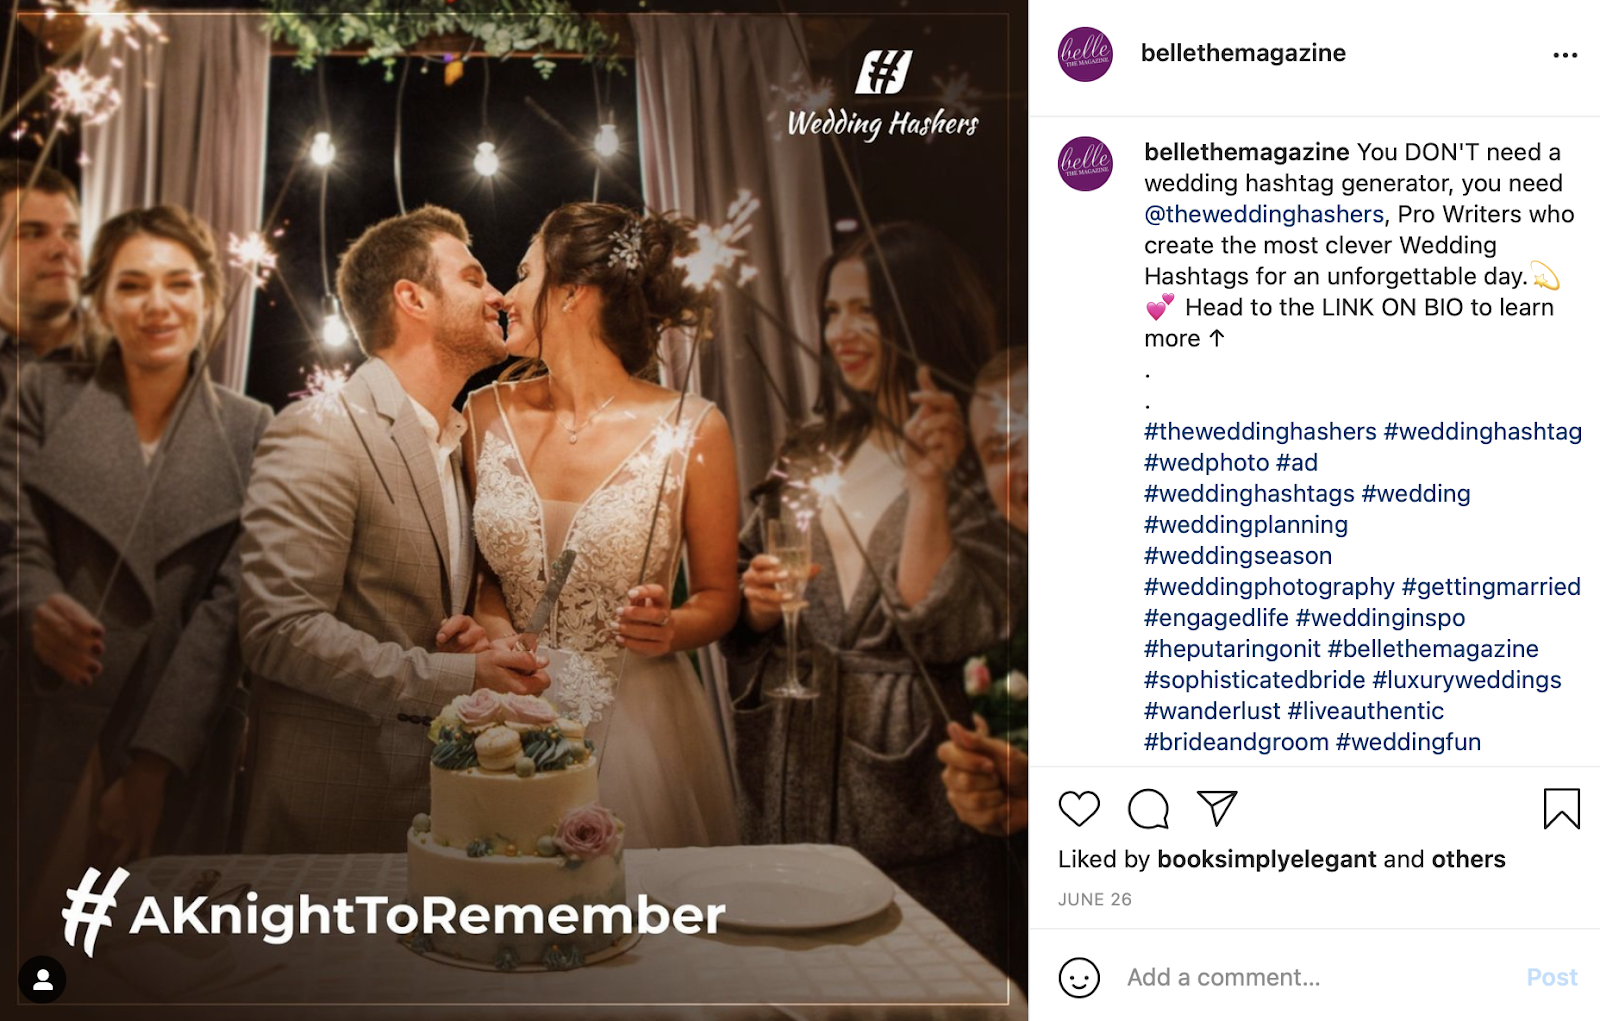 #AKnightToRemember photo with wedding instagram caption by the Wedding Hashers